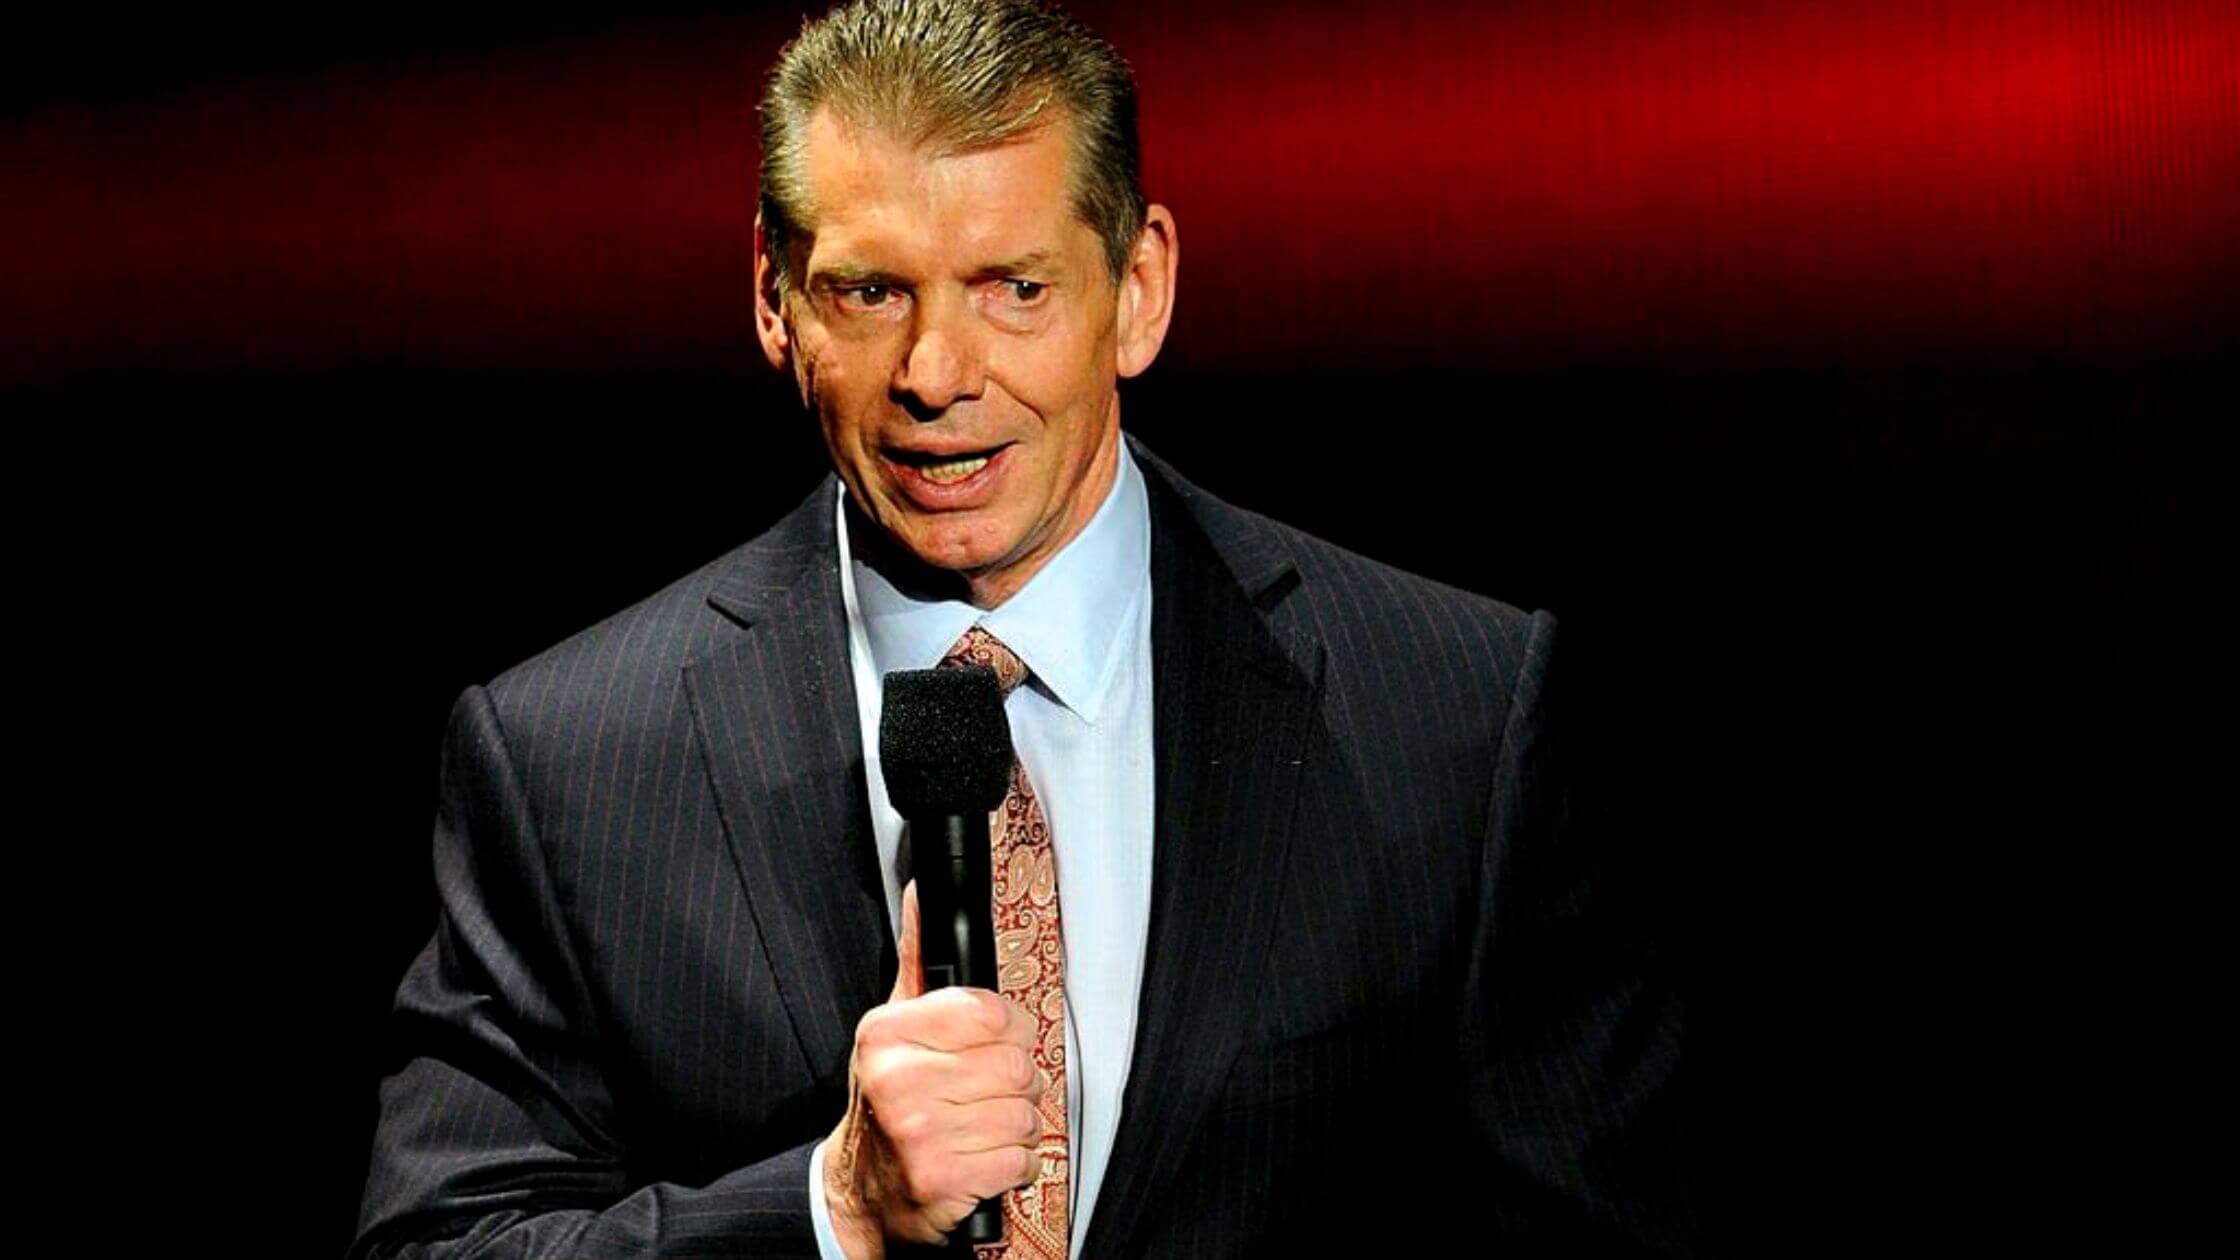 Stephanie McMahon Leaves WWE After Vince McMahons' Return